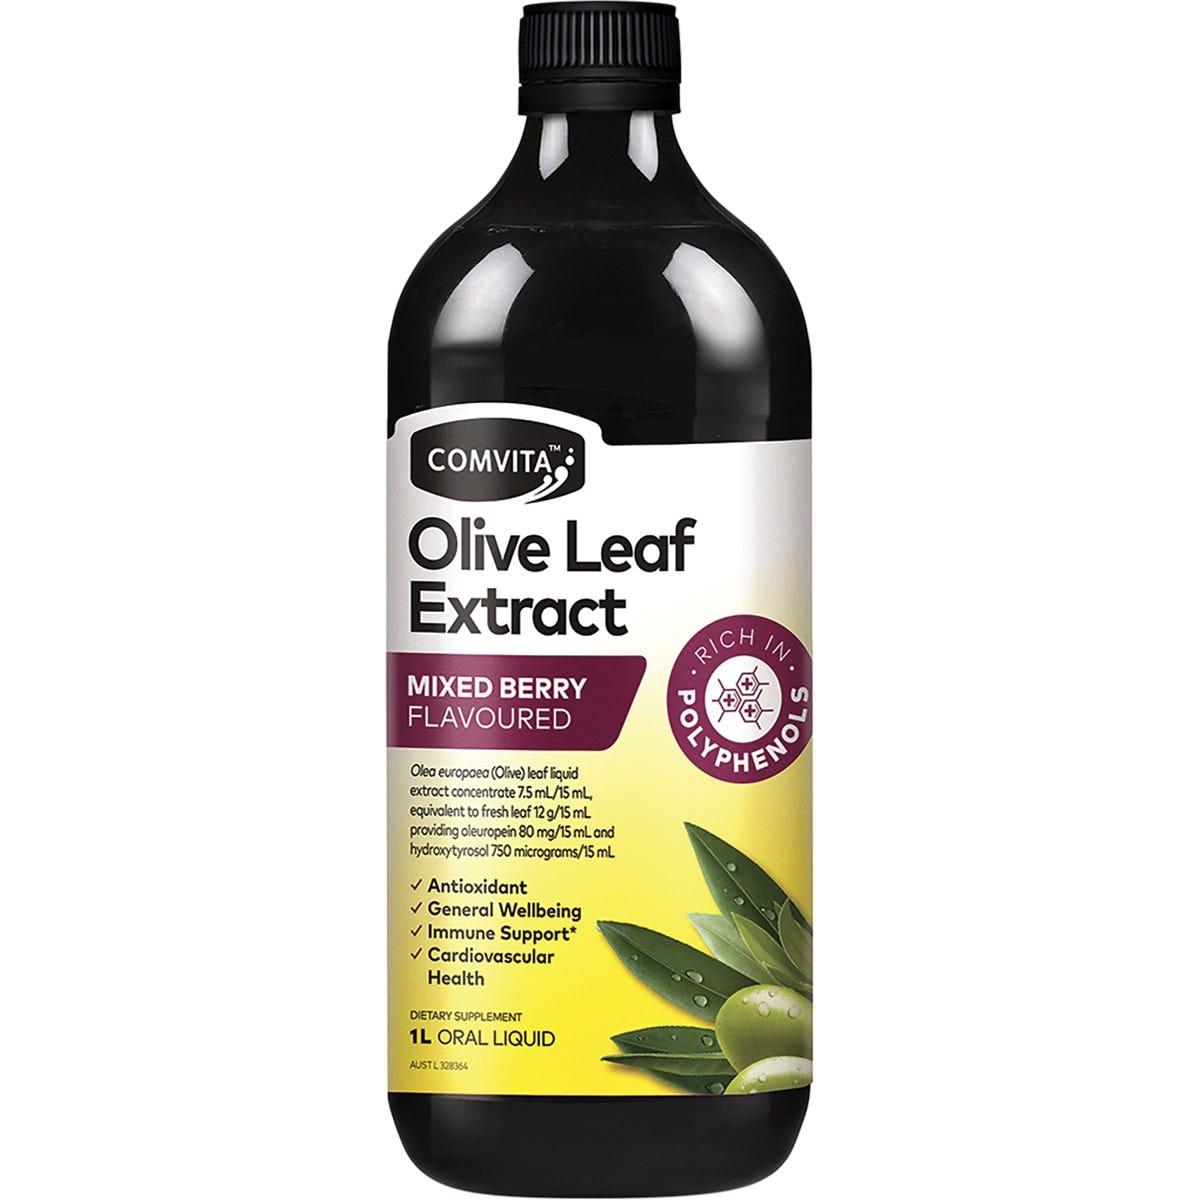 Comvita Olive Leaf Extract Mixed Berry 1L - Dr Earth - Immune Support - Comvita